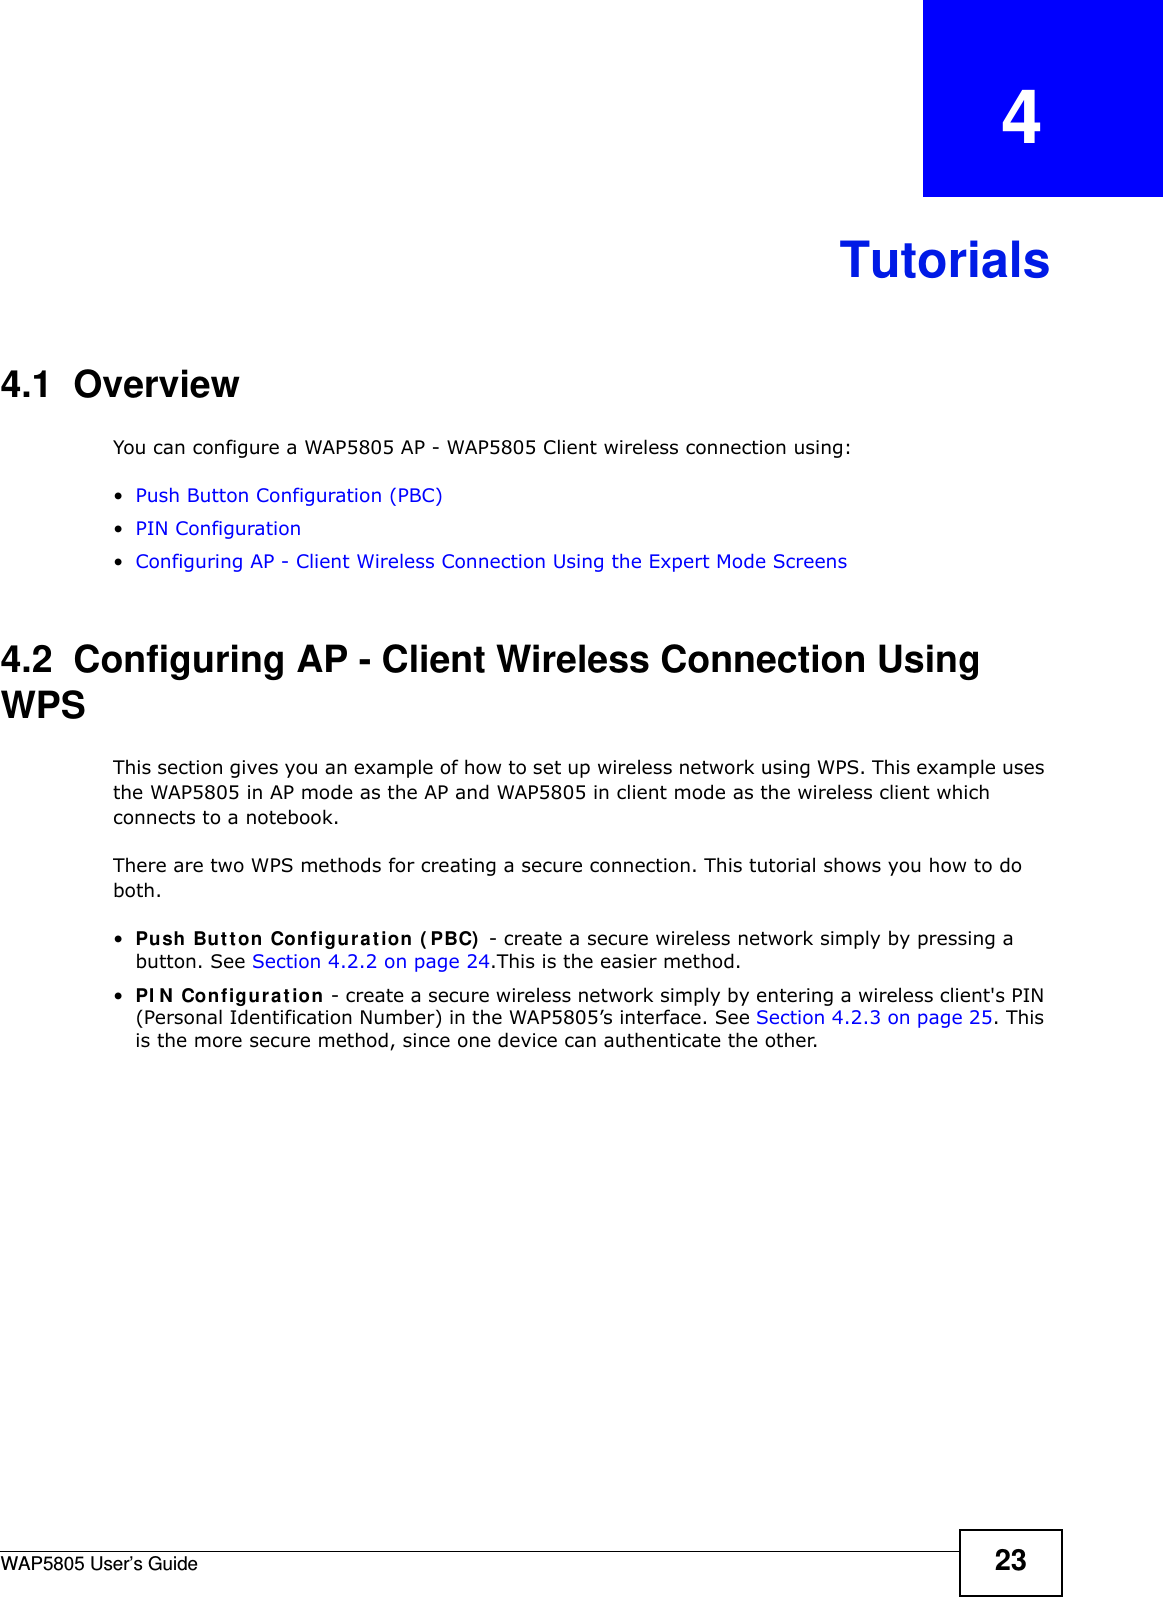 WAP5805 User’s Guide 23CHAPTER   4Tutorials4.1  OverviewYou can configure a WAP5805 AP - WAP5805 Client wireless connection using:•Push Button Configuration (PBC)•PIN Configuration•Configuring AP - Client Wireless Connection Using the Expert Mode Screens4.2  Configuring AP - Client Wireless Connection Using WPSThis section gives you an example of how to set up wireless network using WPS. This example uses the WAP5805 in AP mode as the AP and WAP5805 in client mode as the wireless client which connects to a notebook. There are two WPS methods for creating a secure connection. This tutorial shows you how to do both.•Push Button Configuration (PBC) - create a secure wireless network simply by pressing a button. See Section 4.2.2 on page 24.This is the easier method.•PIN Configuration - create a secure wireless network simply by entering a wireless client&apos;s PIN (Personal Identification Number) in the WAP5805’s interface. See Section 4.2.3 on page 25. This is the more secure method, since one device can authenticate the other.